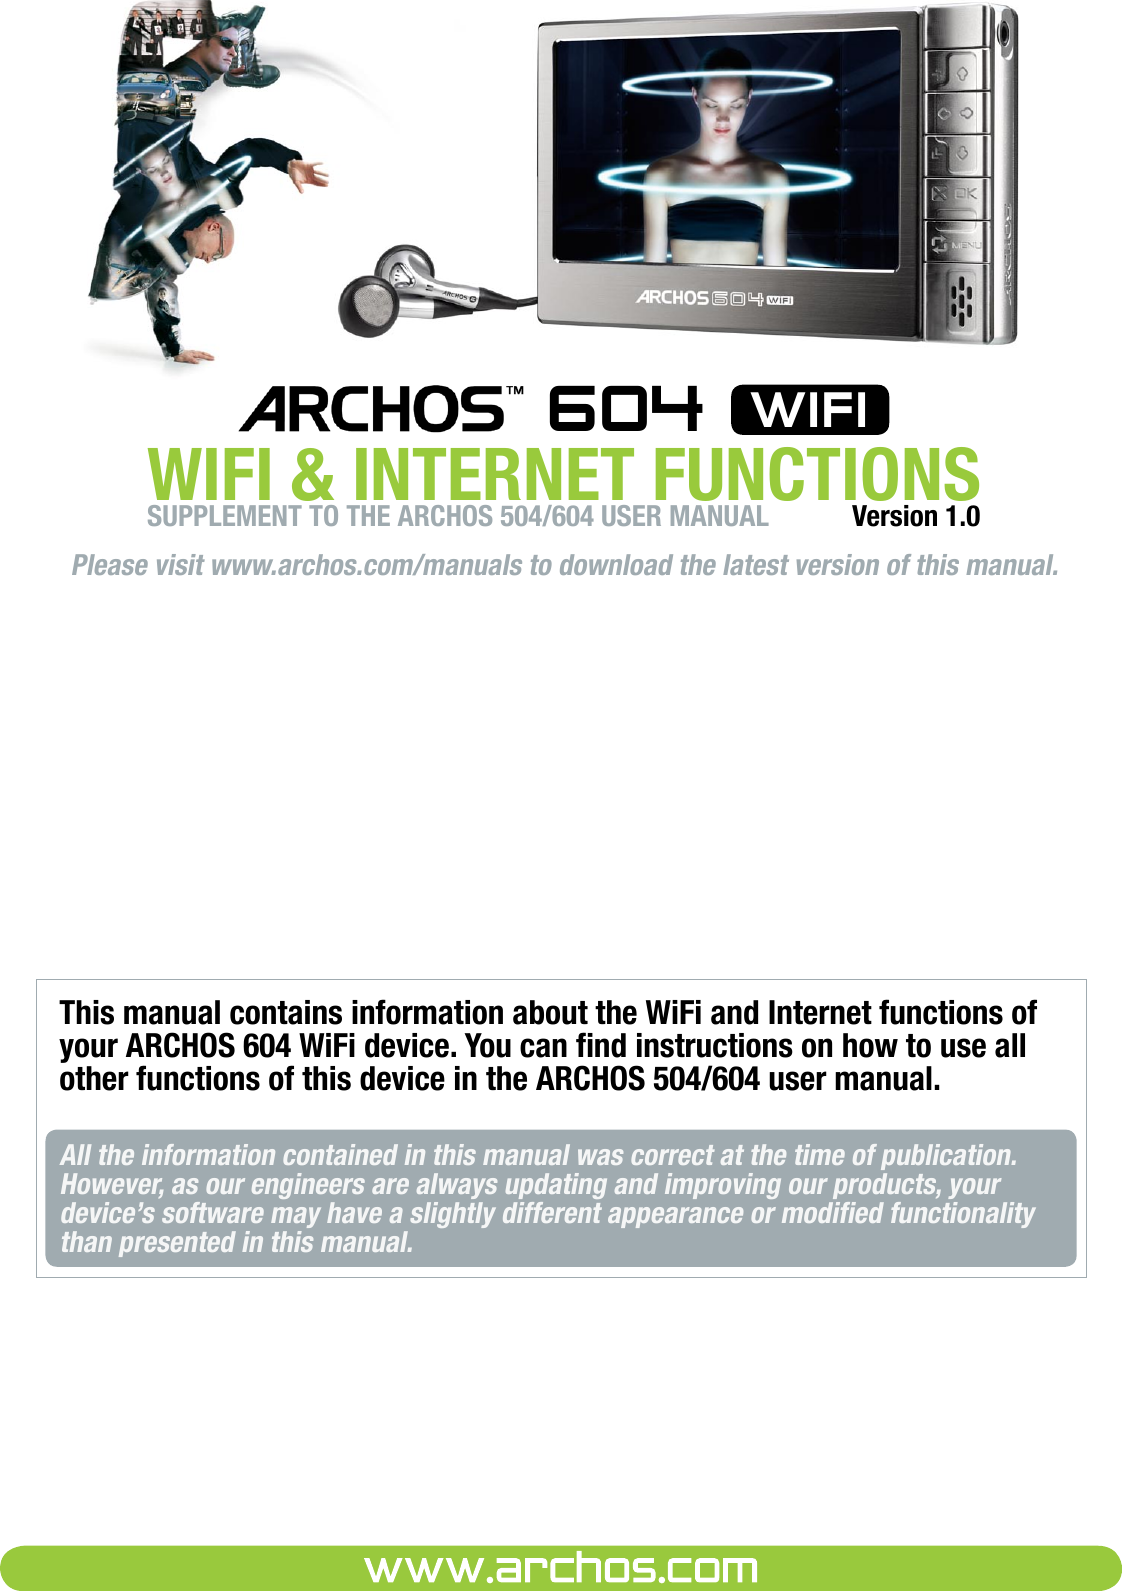 Please visit www.archos.com/manuals to download the latest version of this manual.WIFI &amp; INTERNET FUNCTIONS 604  wifiVersion 1.0This manual contains information about the WiFi and Internet functions of your ARCHOS 604 WiFi device. You can nd instructions on how to use all other functions of this device in the ARCHOS 504/604 user manual.All the information contained in this manual was correct at the time of publication. However, as our engineers are always updating and improving our products, your device’s software may have a slightly different appearance or modied functionality than presented in this manual.SUPPLEMENT TO THE ARCHOS 504/604 USER MANUAL